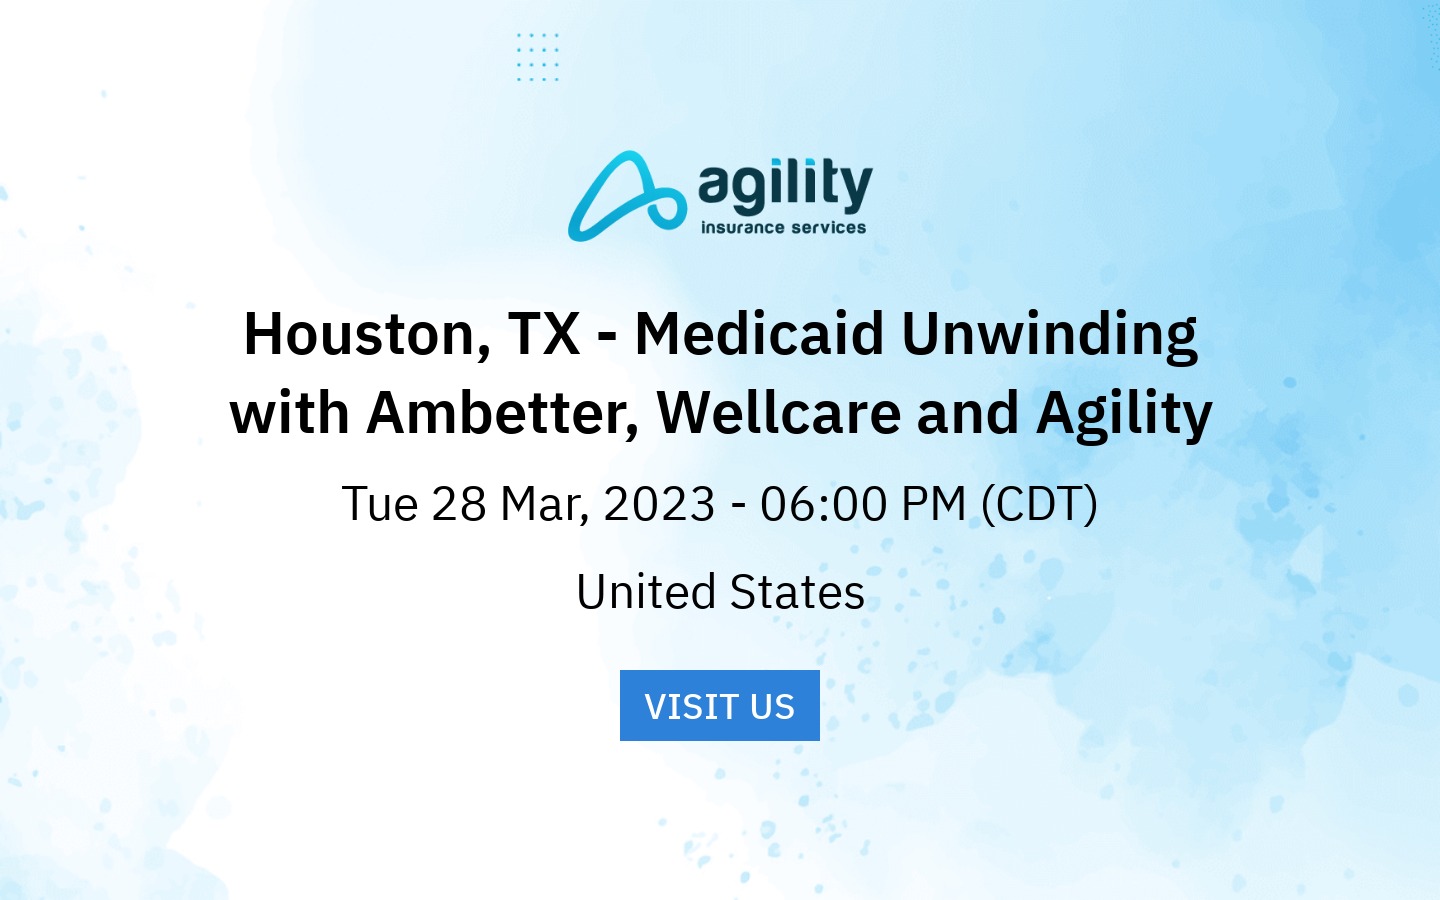 Houston, TX Medicaid Unwinding with Ambetter, Wellcare and Agility